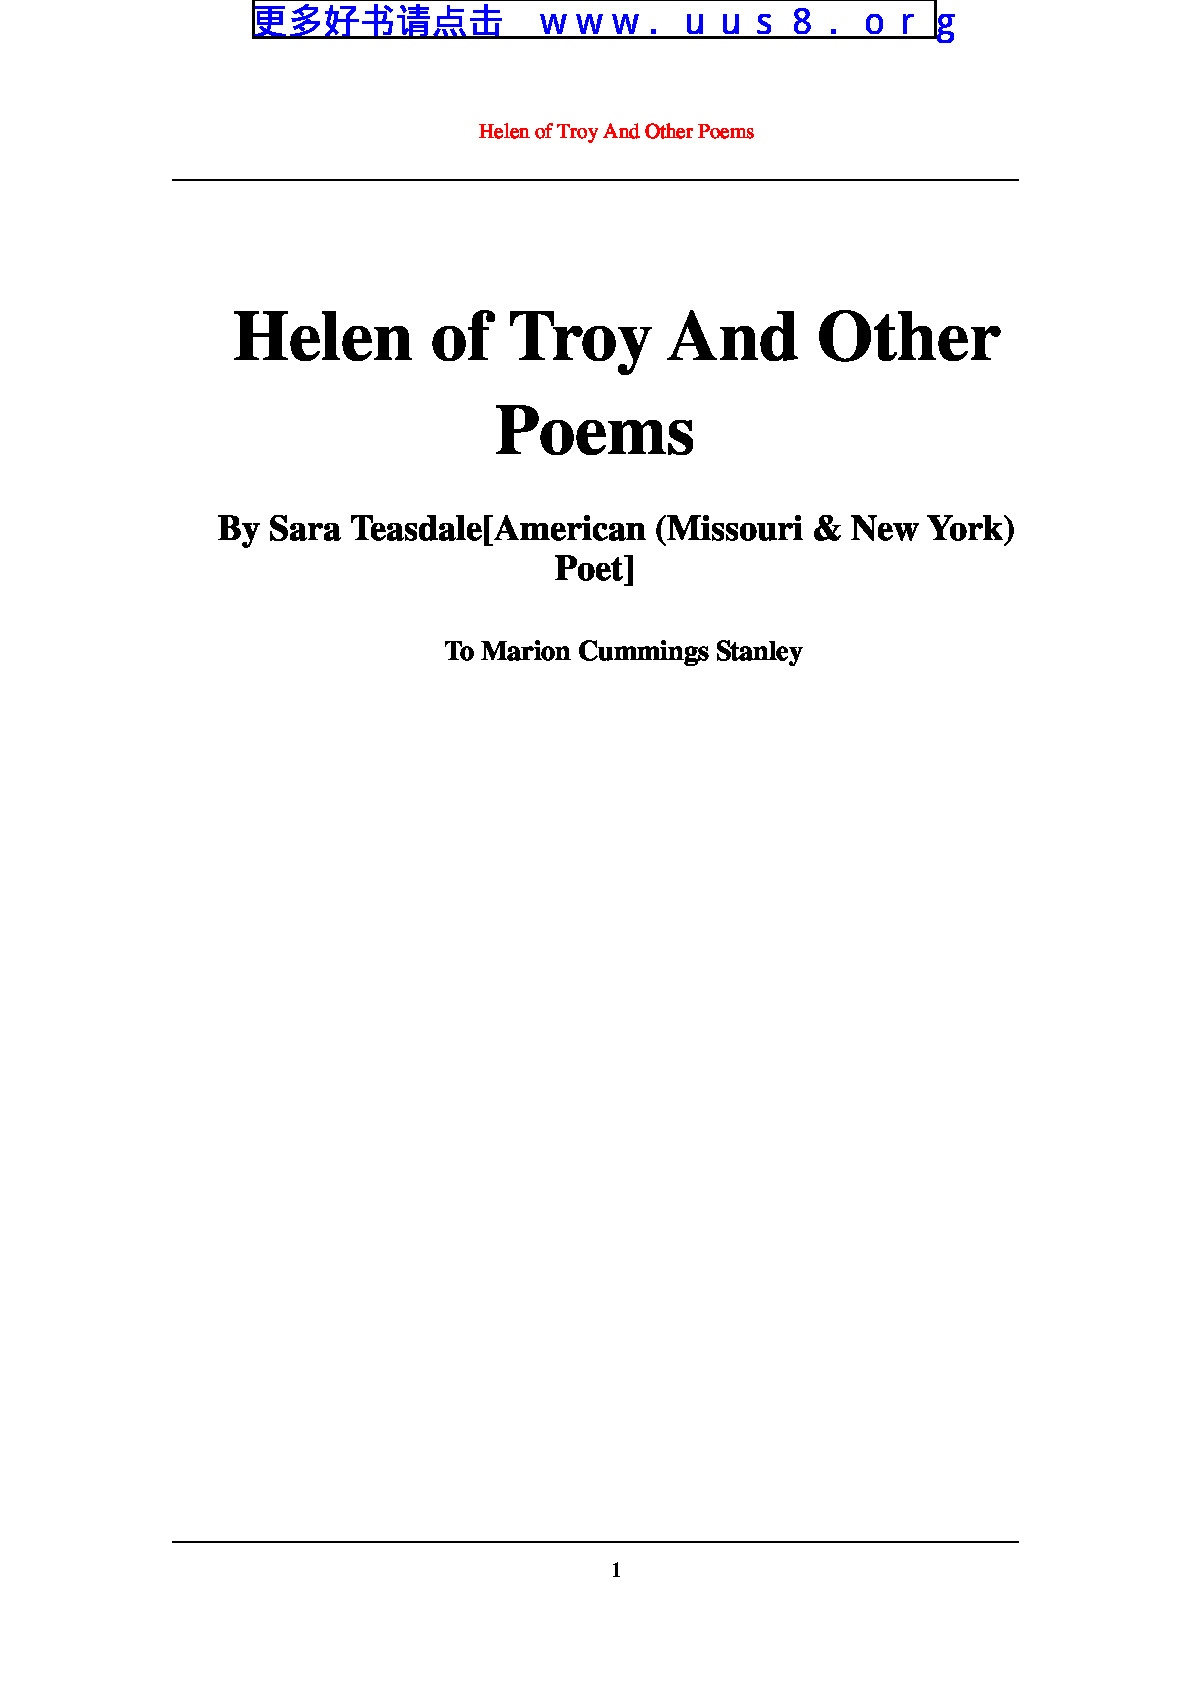 Helen_of_Troy_And_Other_Poems(特洛伊的海伦)